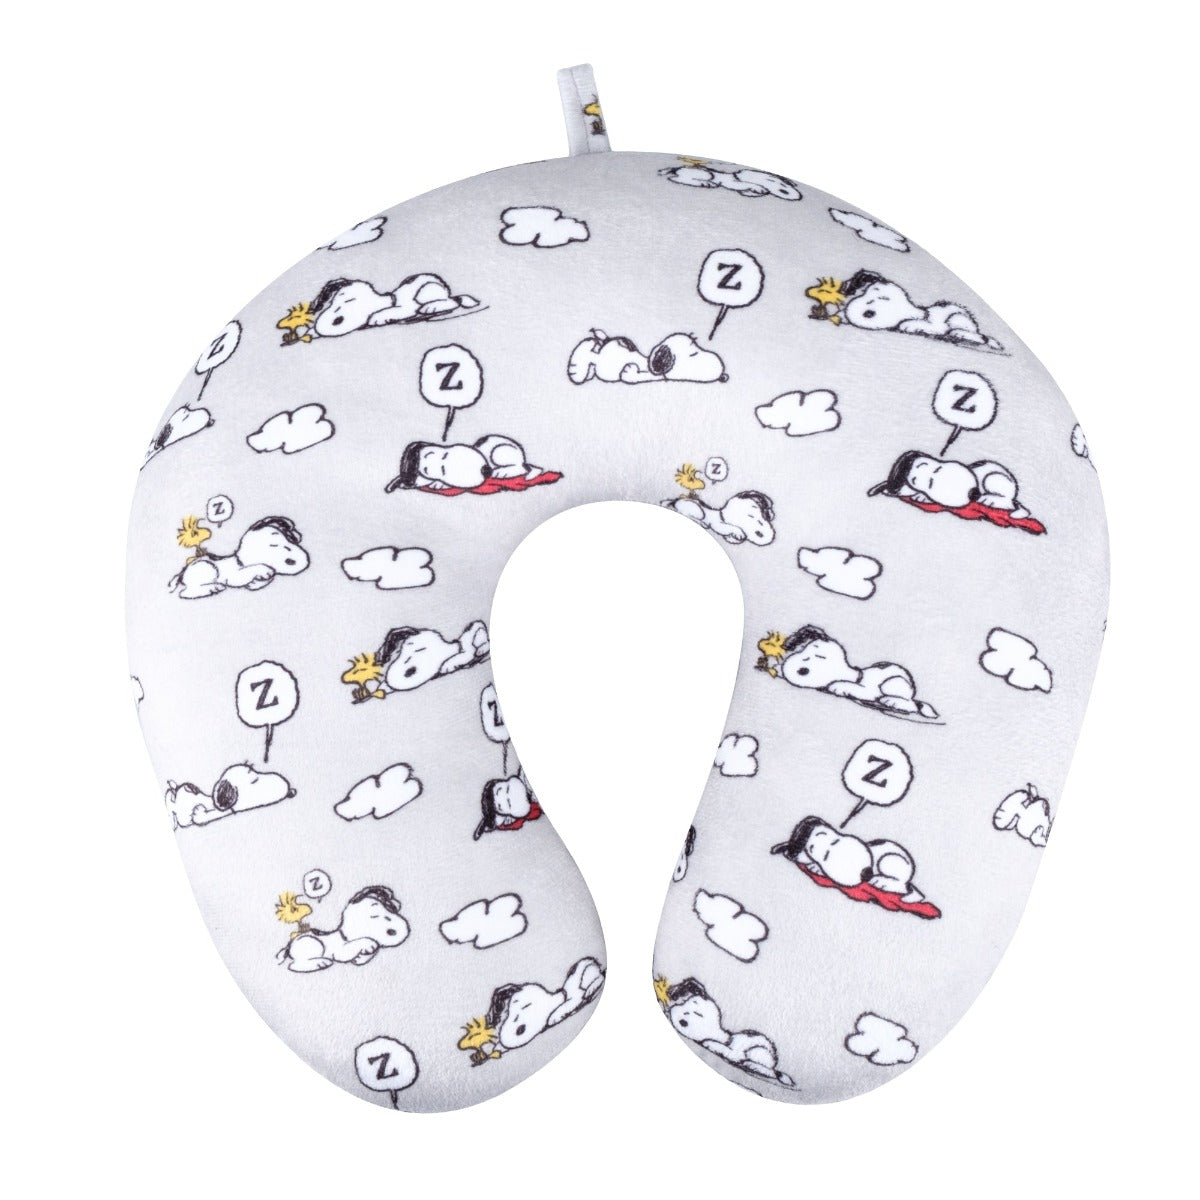 Ful Peanuts snoopy woodstock clouds travel neck pillow - best neckpillows